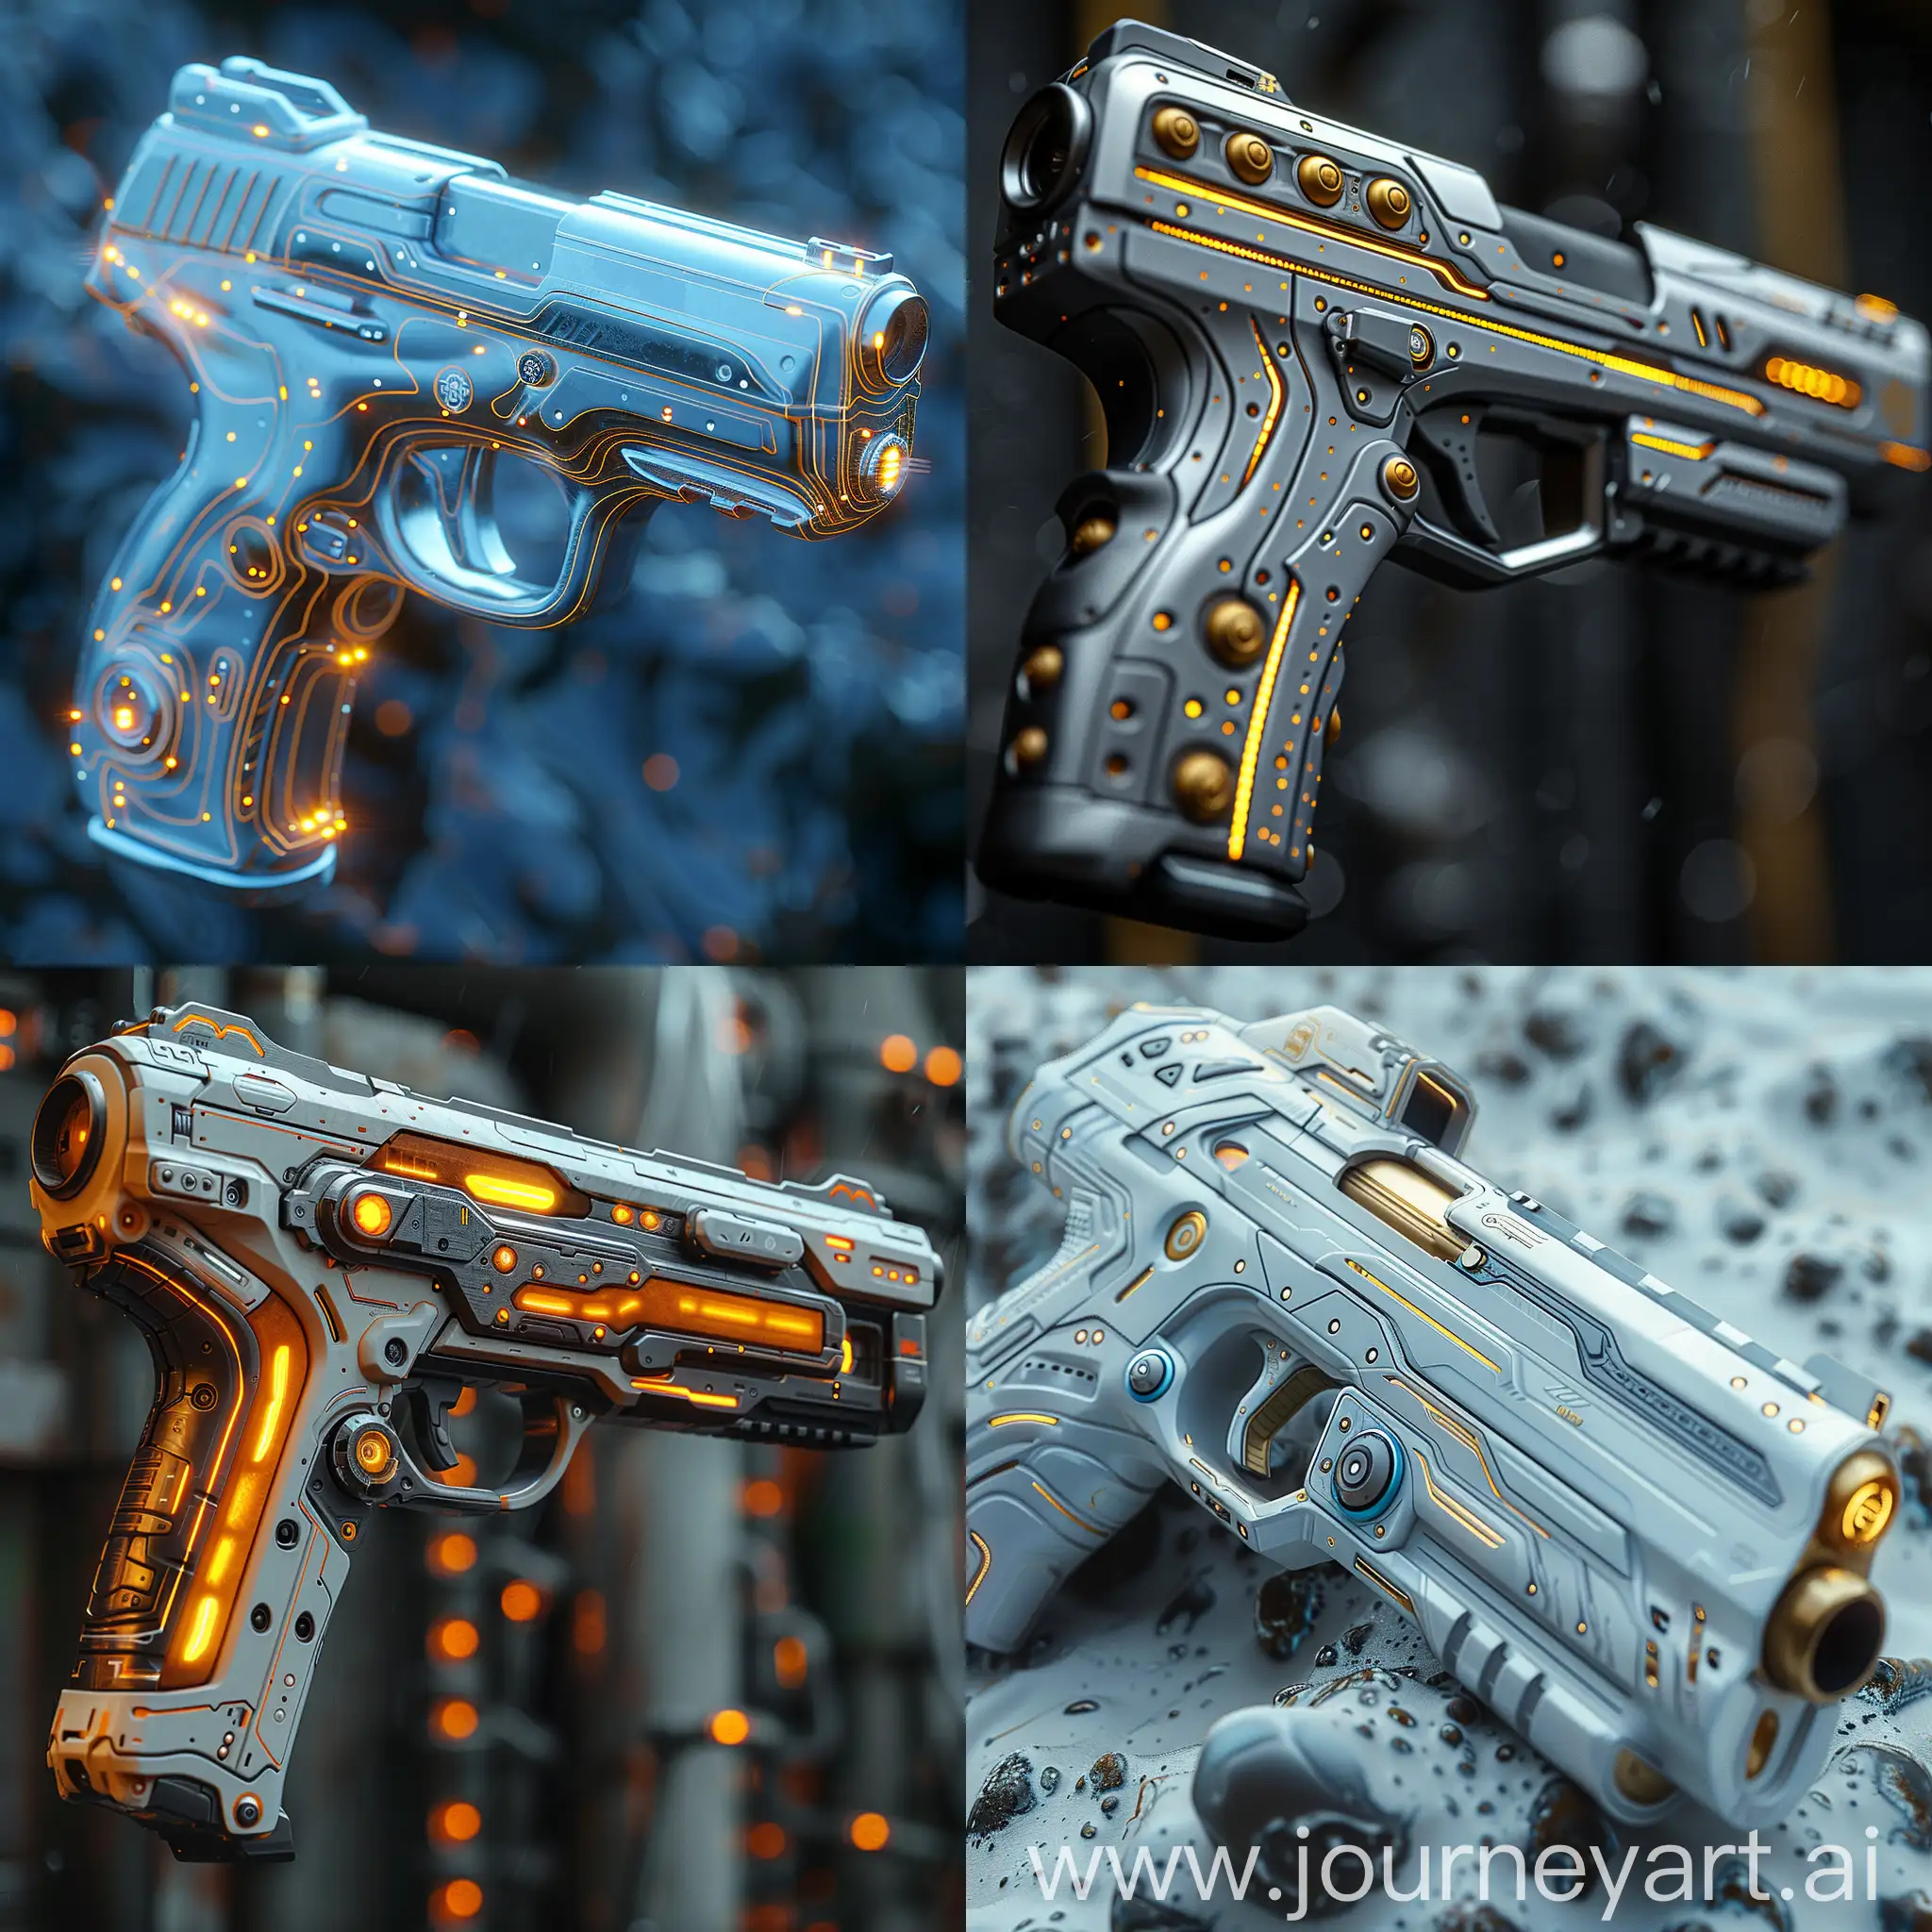 Futuristic-UltraModern-Pistol-with-Nanotechnology-Materials-and-EnergyEfficient-LEDs